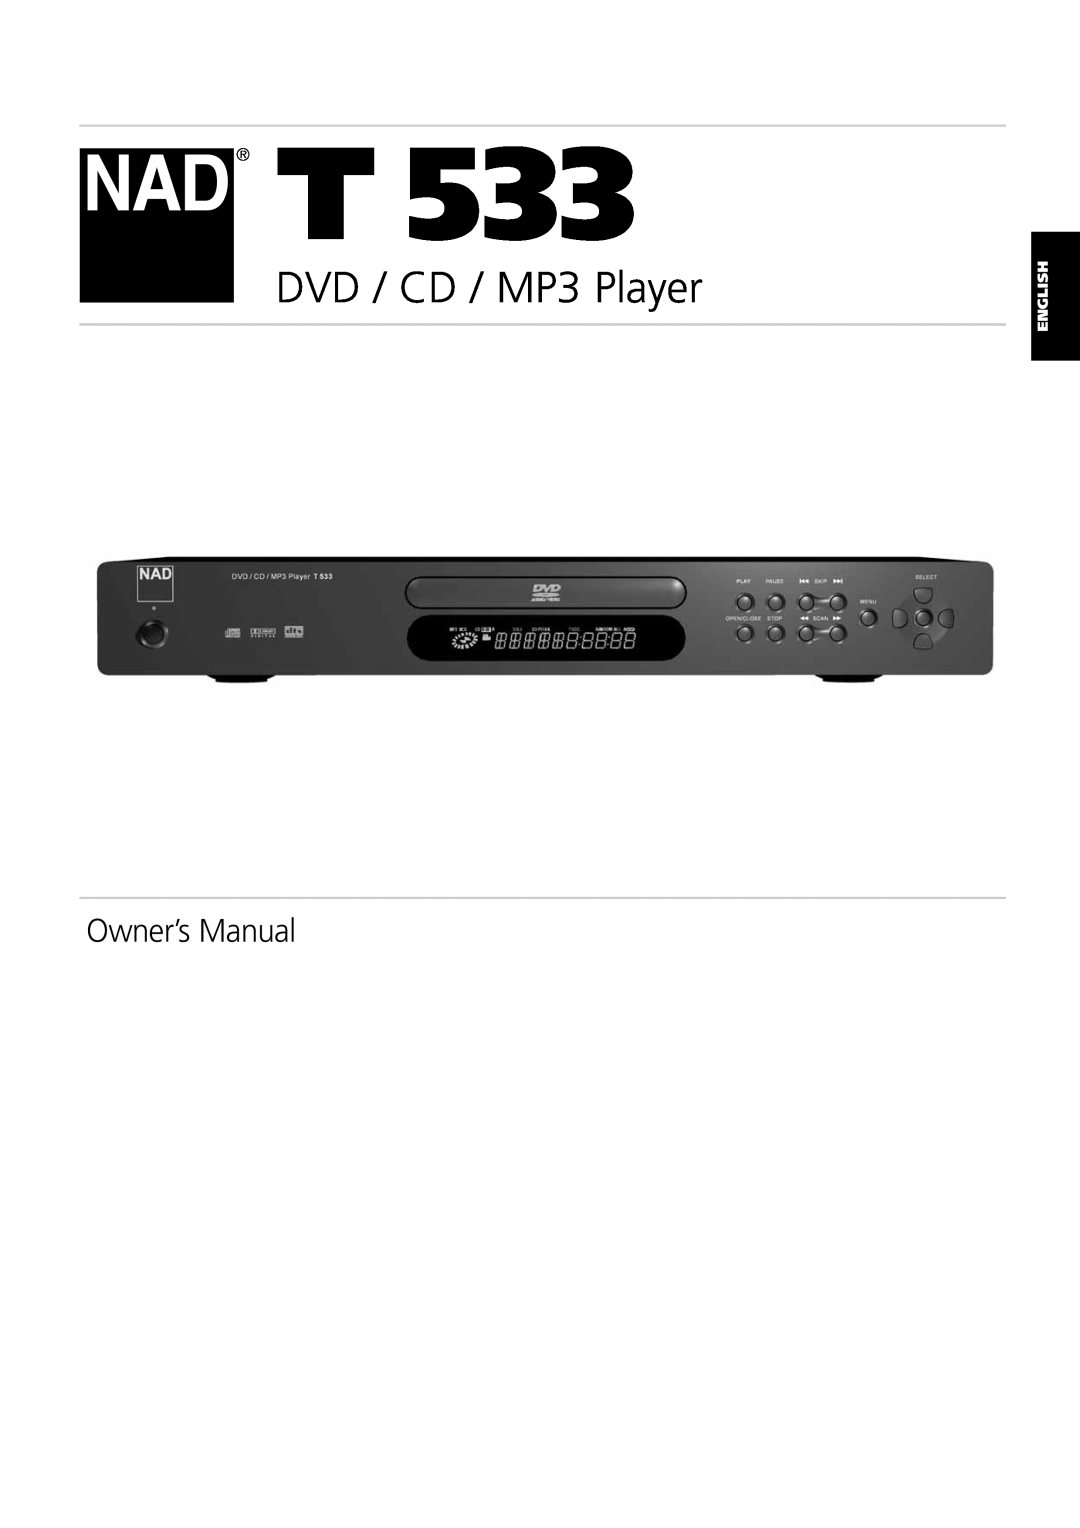 NAD T 533 owner manual English, DVD / CD / MP3 Player, Owner’s Manual 